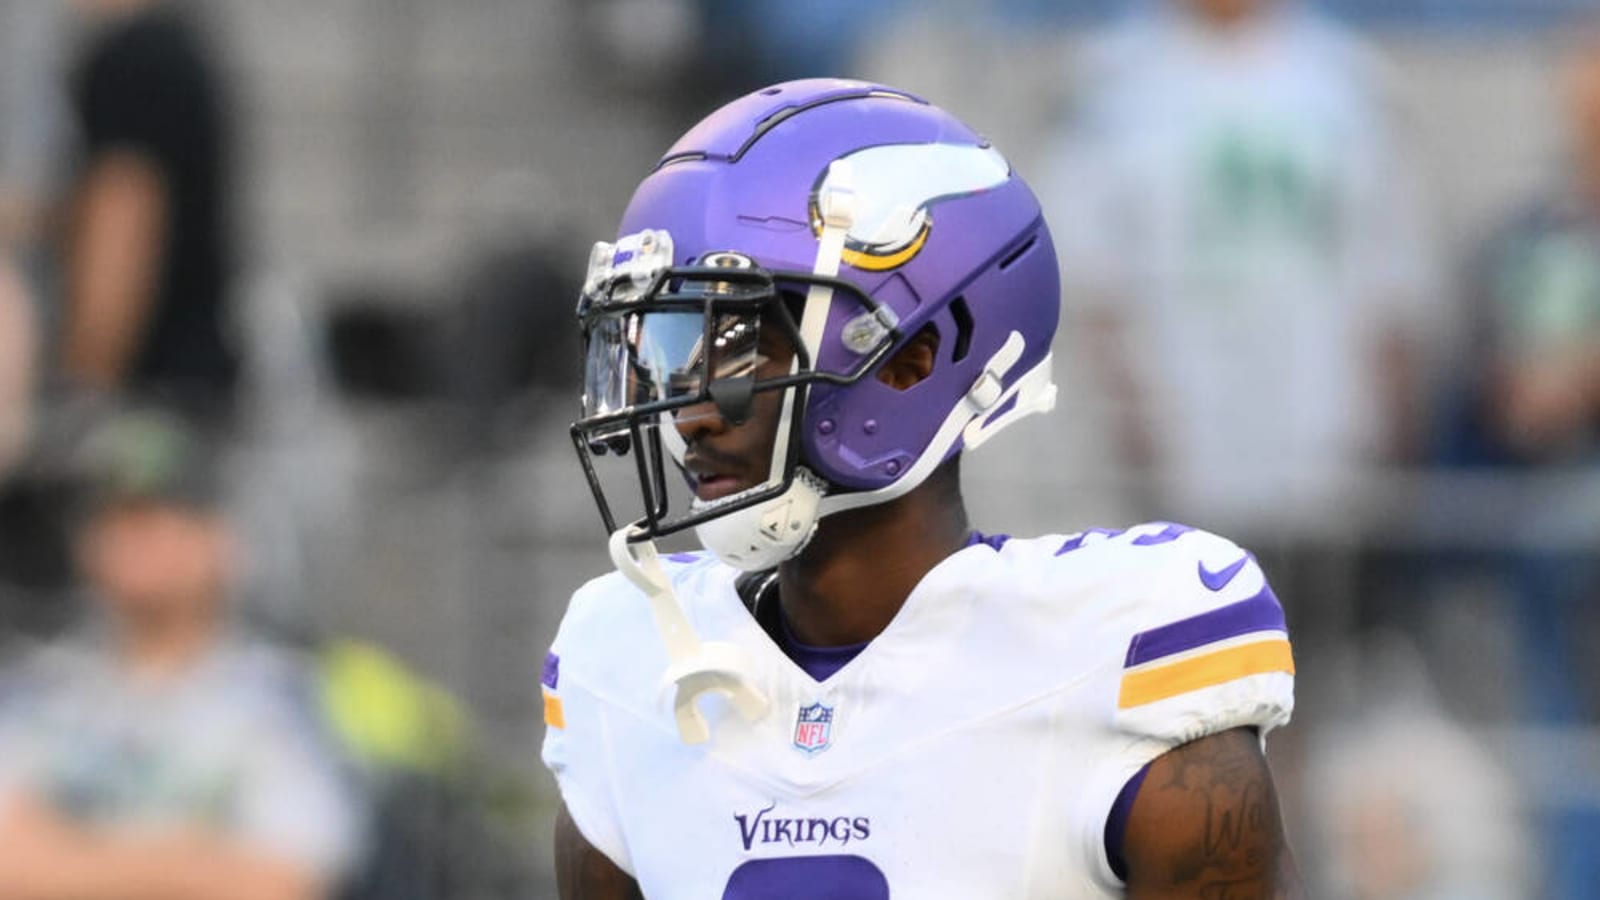 Potential impact of Vikings' rookie WR may be overlooked